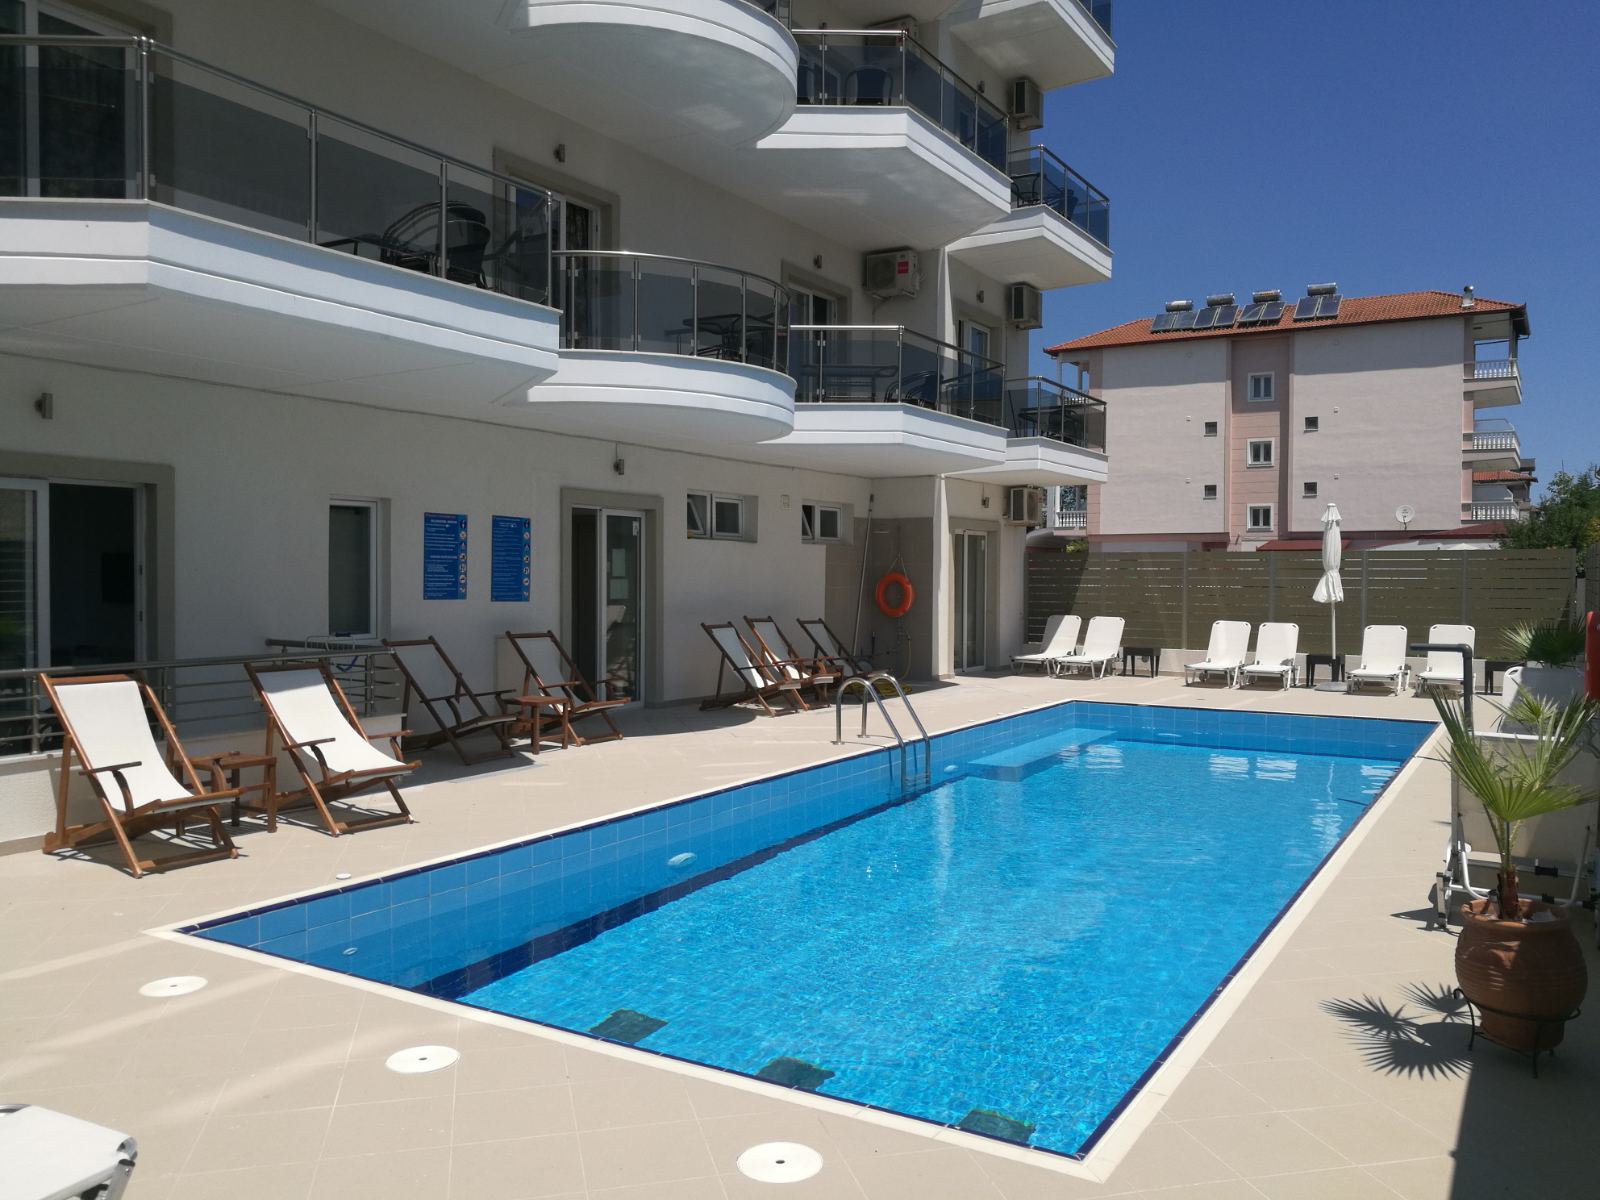 Luxury apartments Grand in Olympic Beach - Flats for Rent in Olimpiaki  Akti, Greece